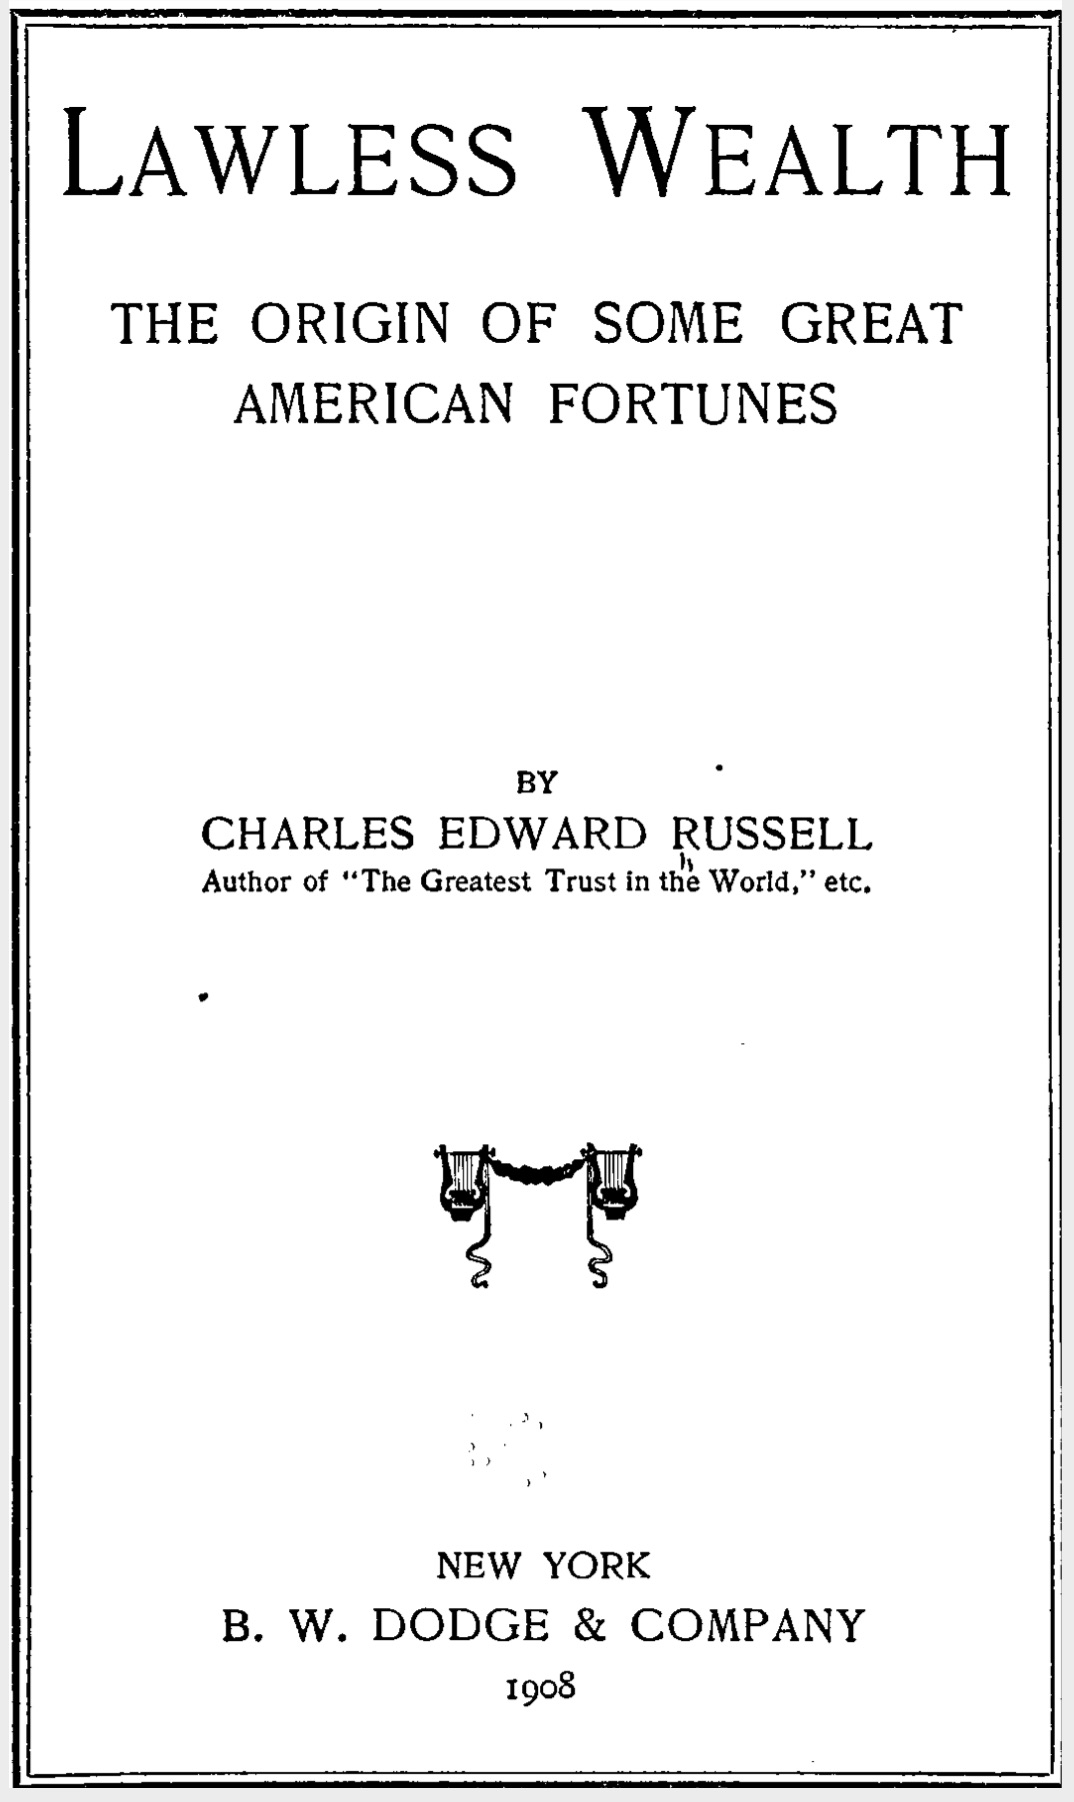 Lawless wealth; the origin of some great American fortunes (1908) by Charles Edward Russell